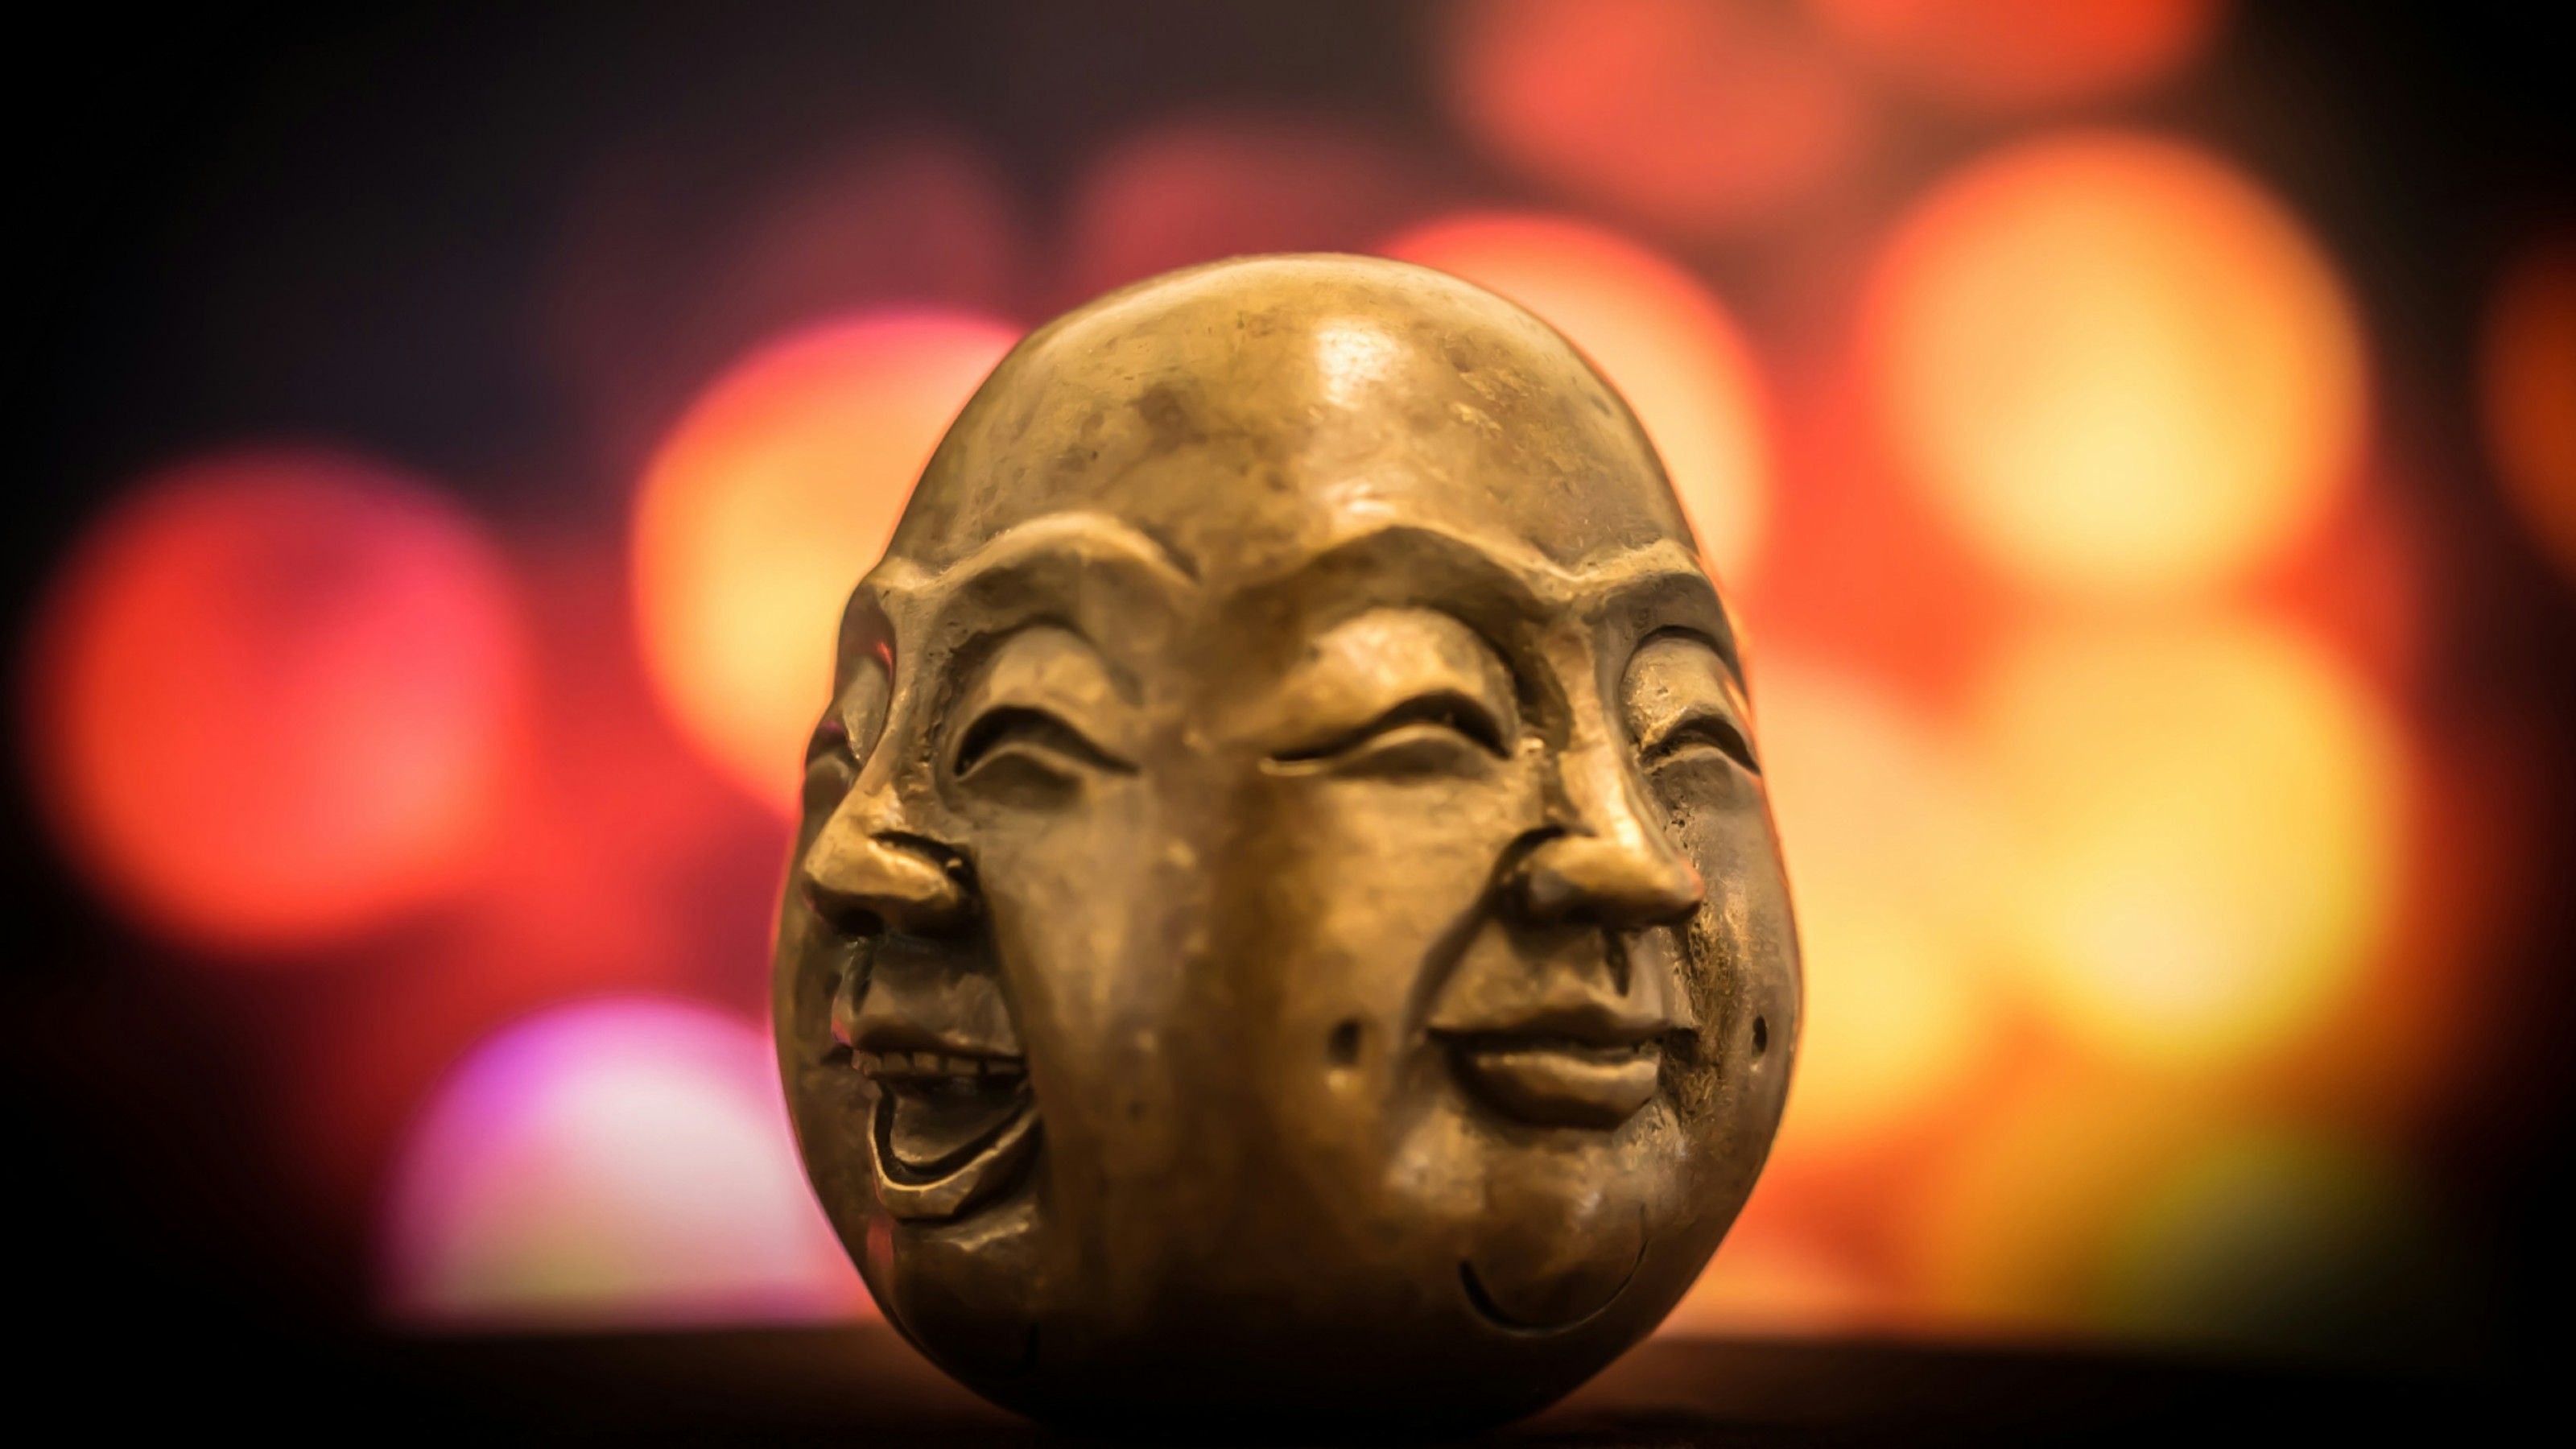 A small statue depicting a face with dual expressions, smiling and neutral, against a blurred background of colorful bokeh lights.